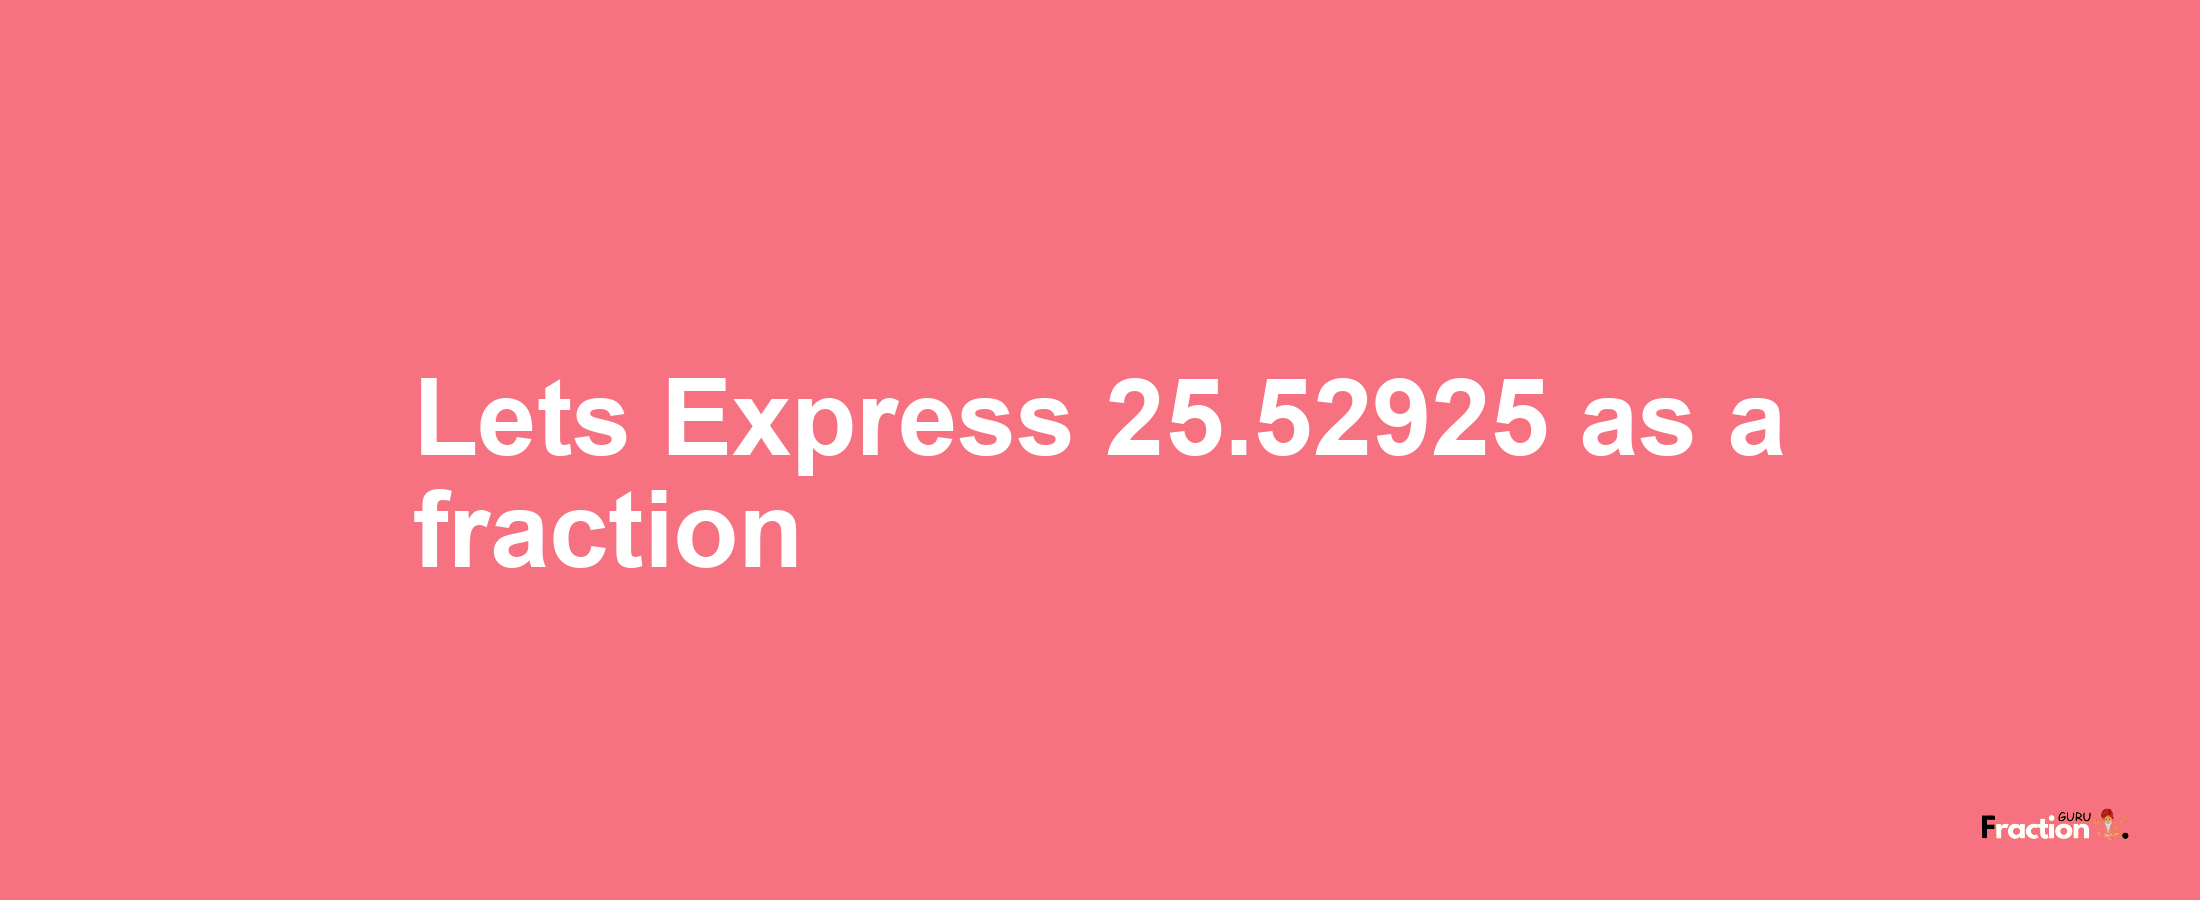 Lets Express 25.52925 as afraction